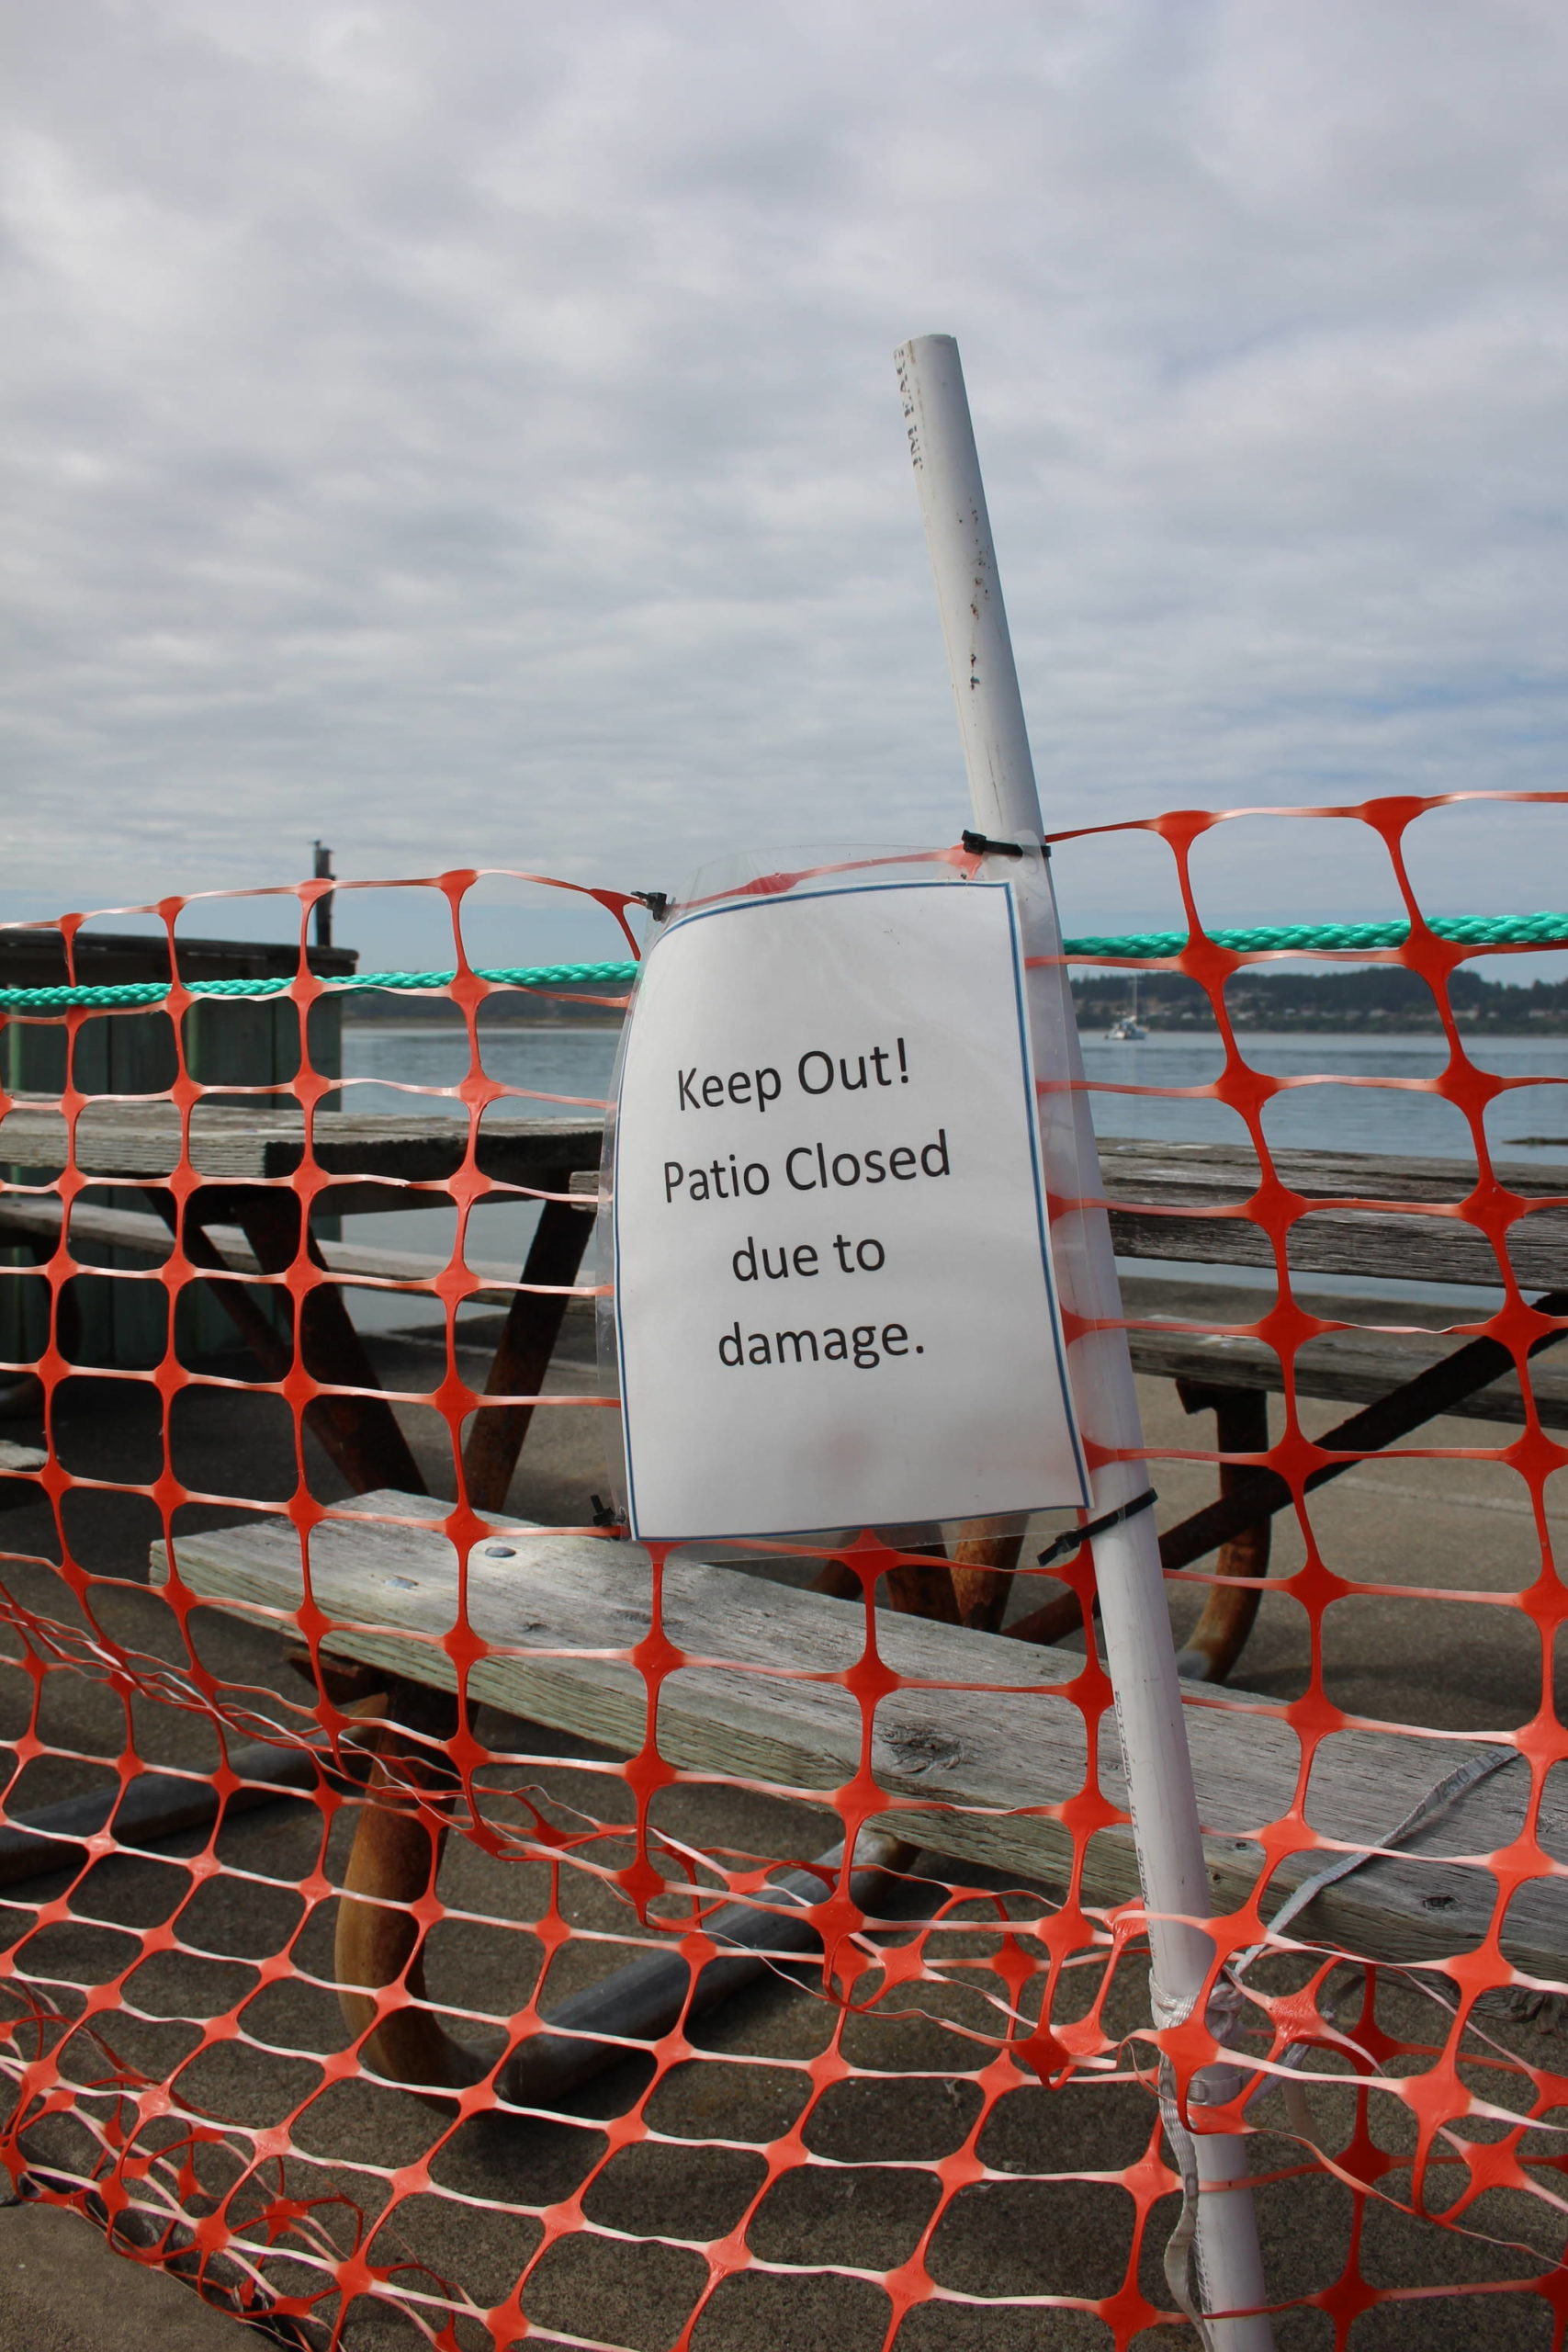 One of the patios on F dock at the Oak Harbor Marina is closed to visitors because years of storms have damaged it, resulting in the loss of some of its walls. (Photo by Emily Gilbert/Whidbey News-Times)